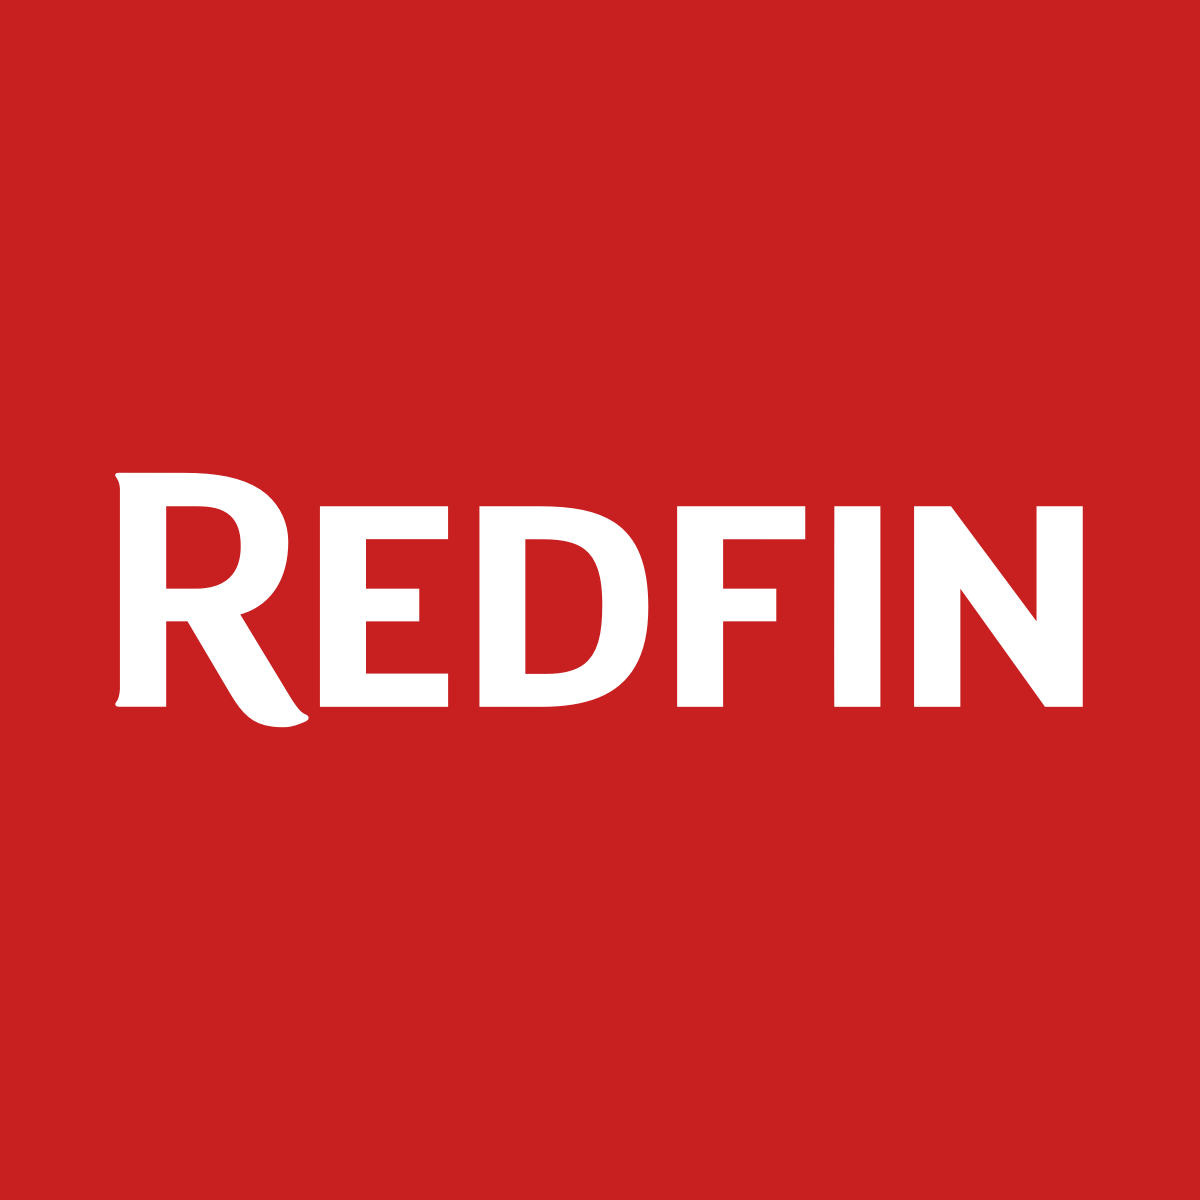 Redfin Logo - Real Estate, Homes for Sale, MLS Listings, Agents | Redfin